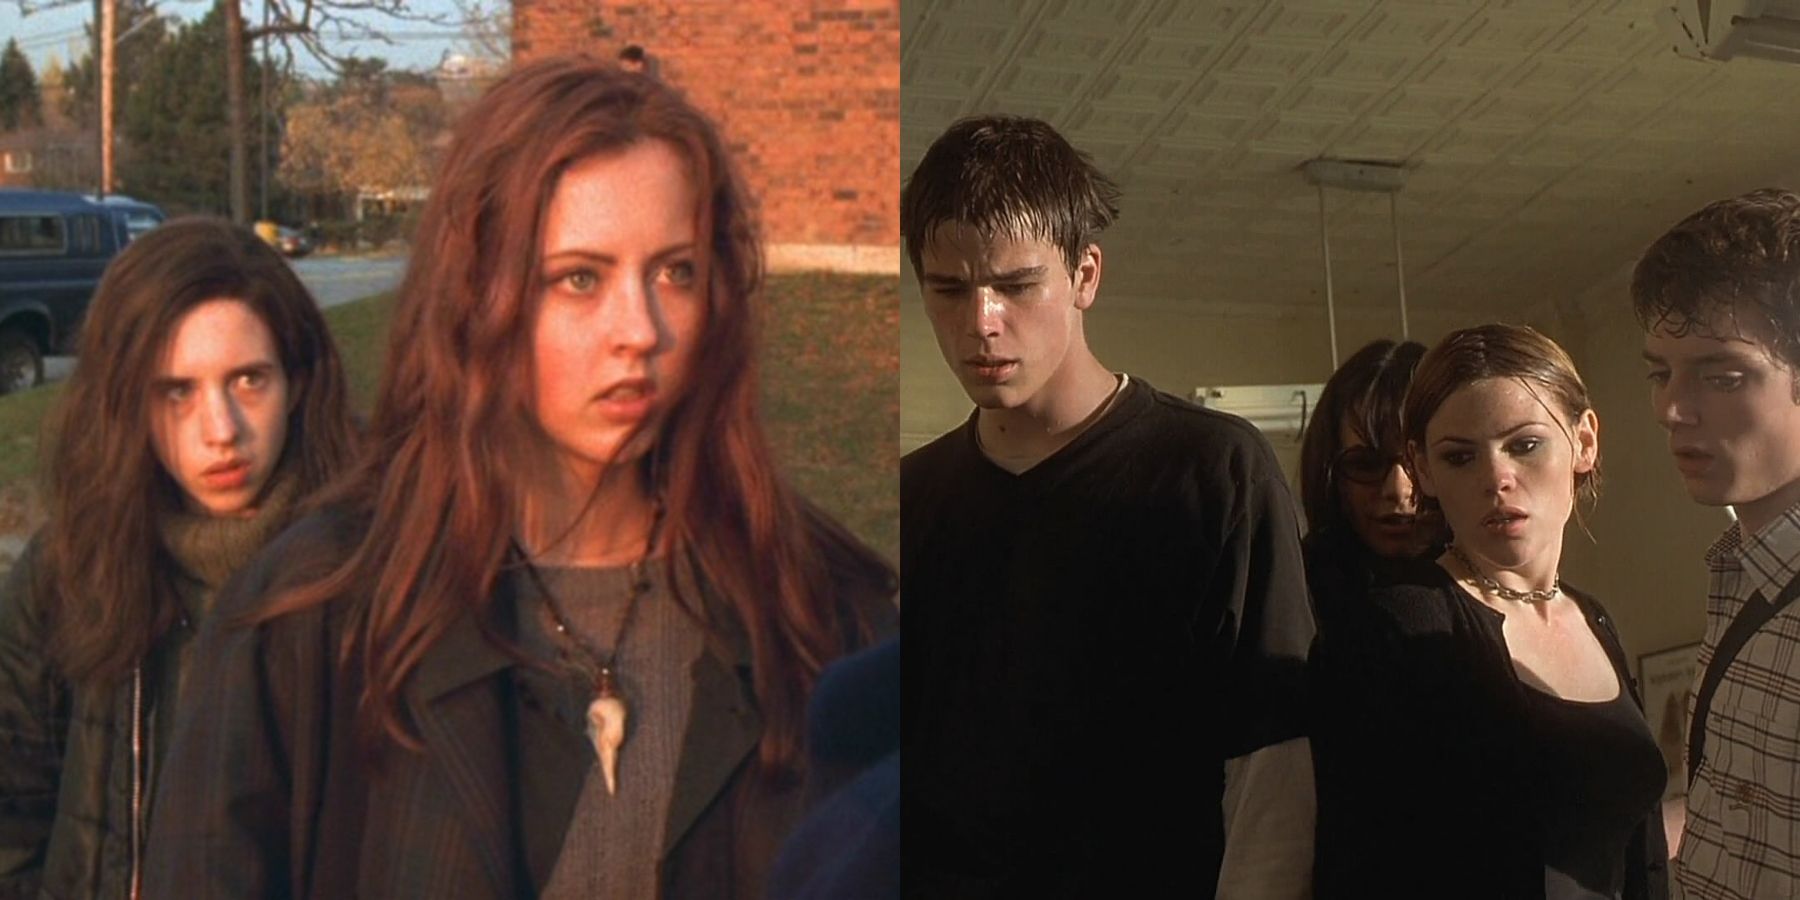 Split image of Brigitte and Ginger from Ginger Snaps and the main characters from The Faculty